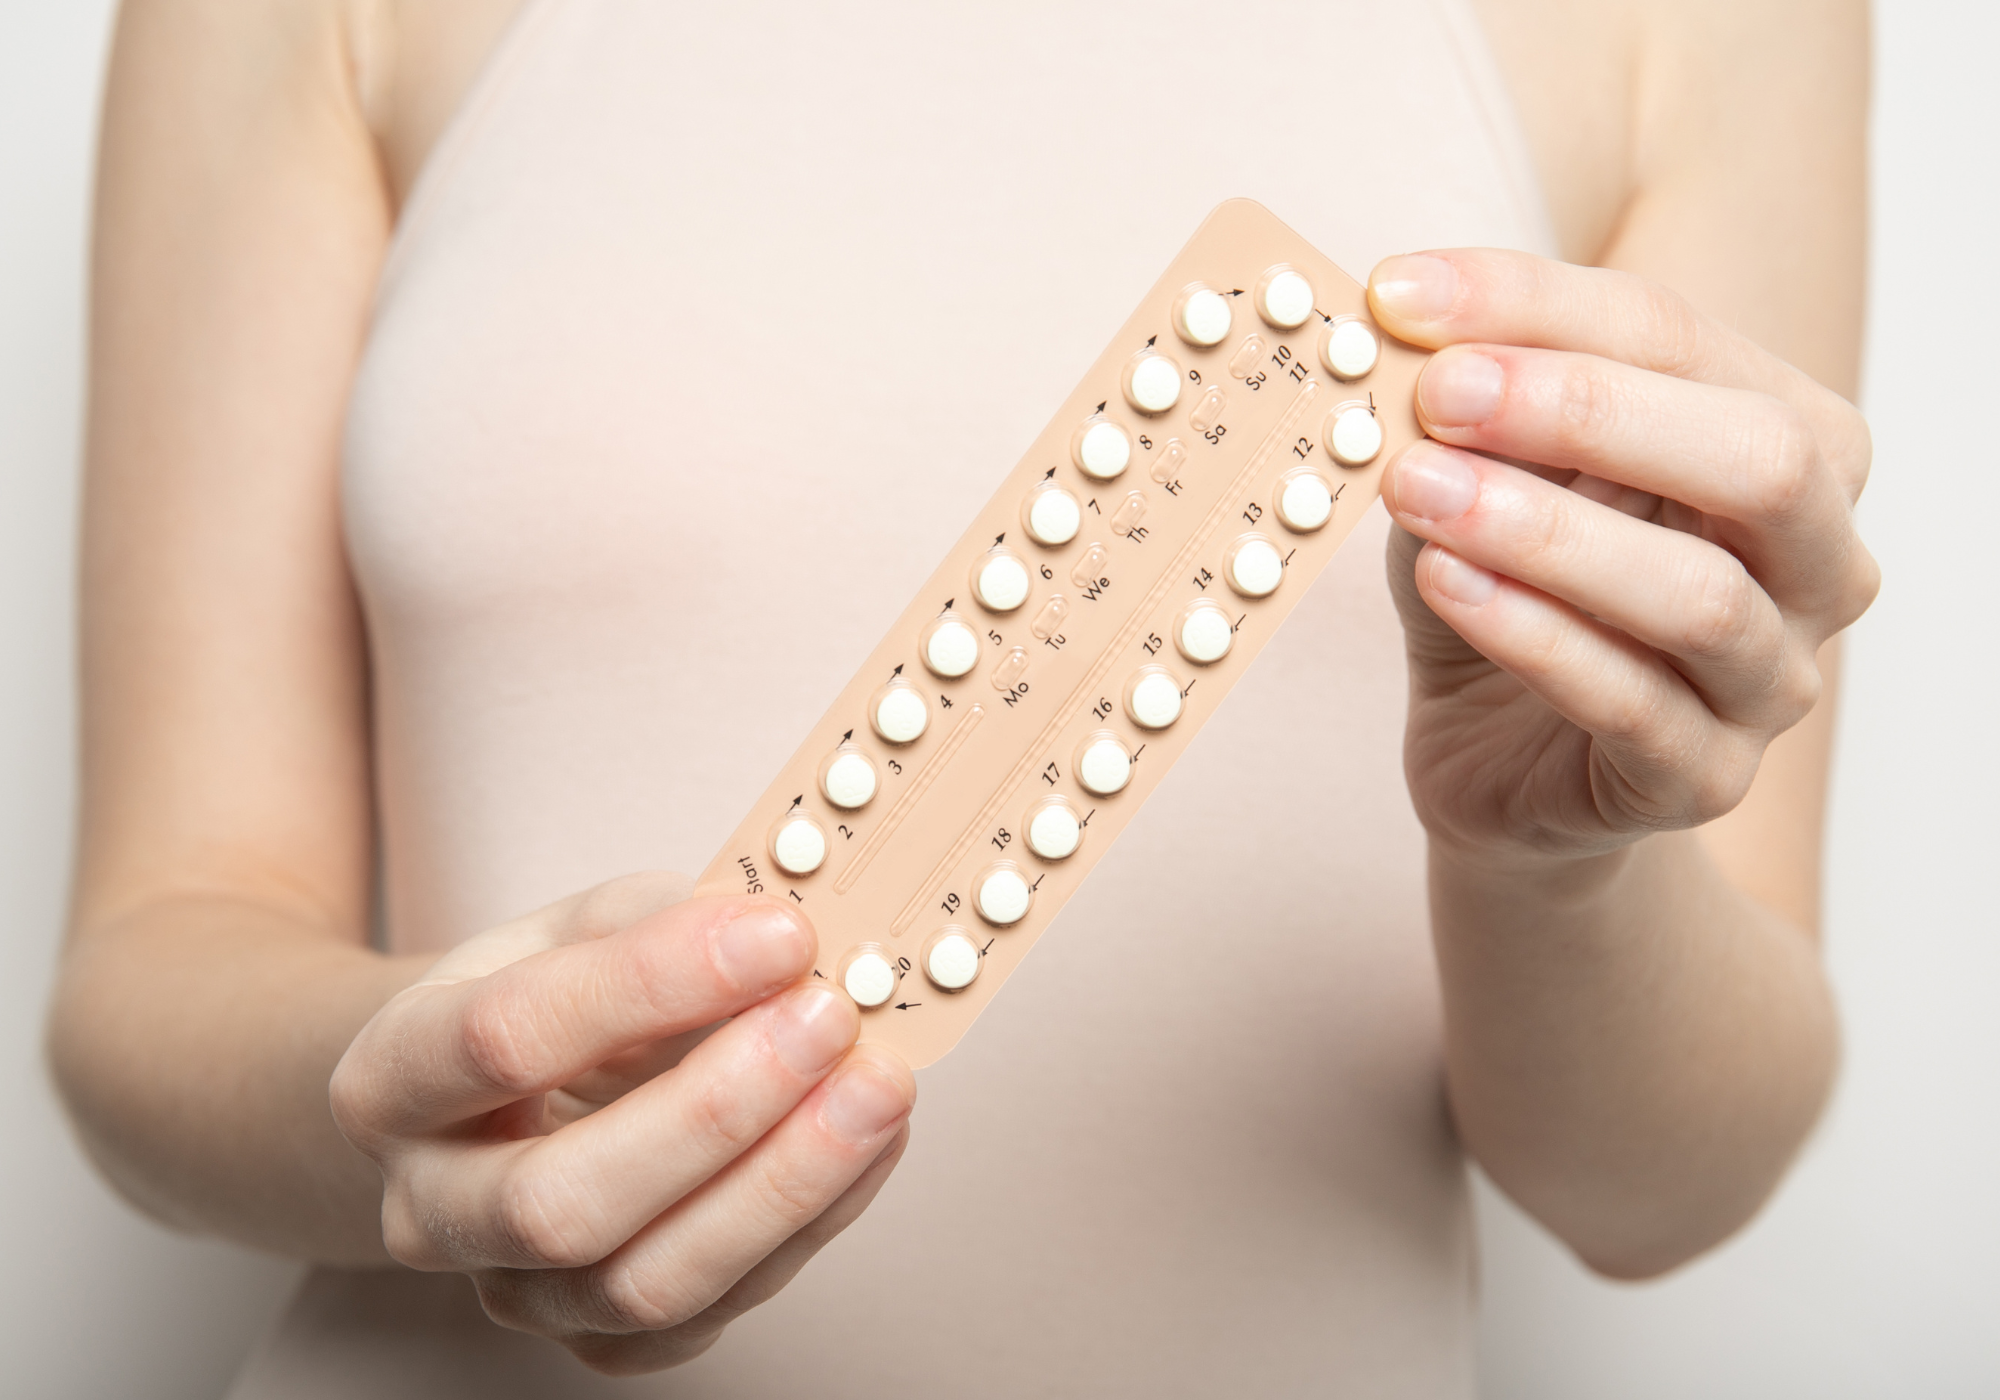 What You Should Do if Your Cycle is Irregular and You’ve Been Recommended the Pill